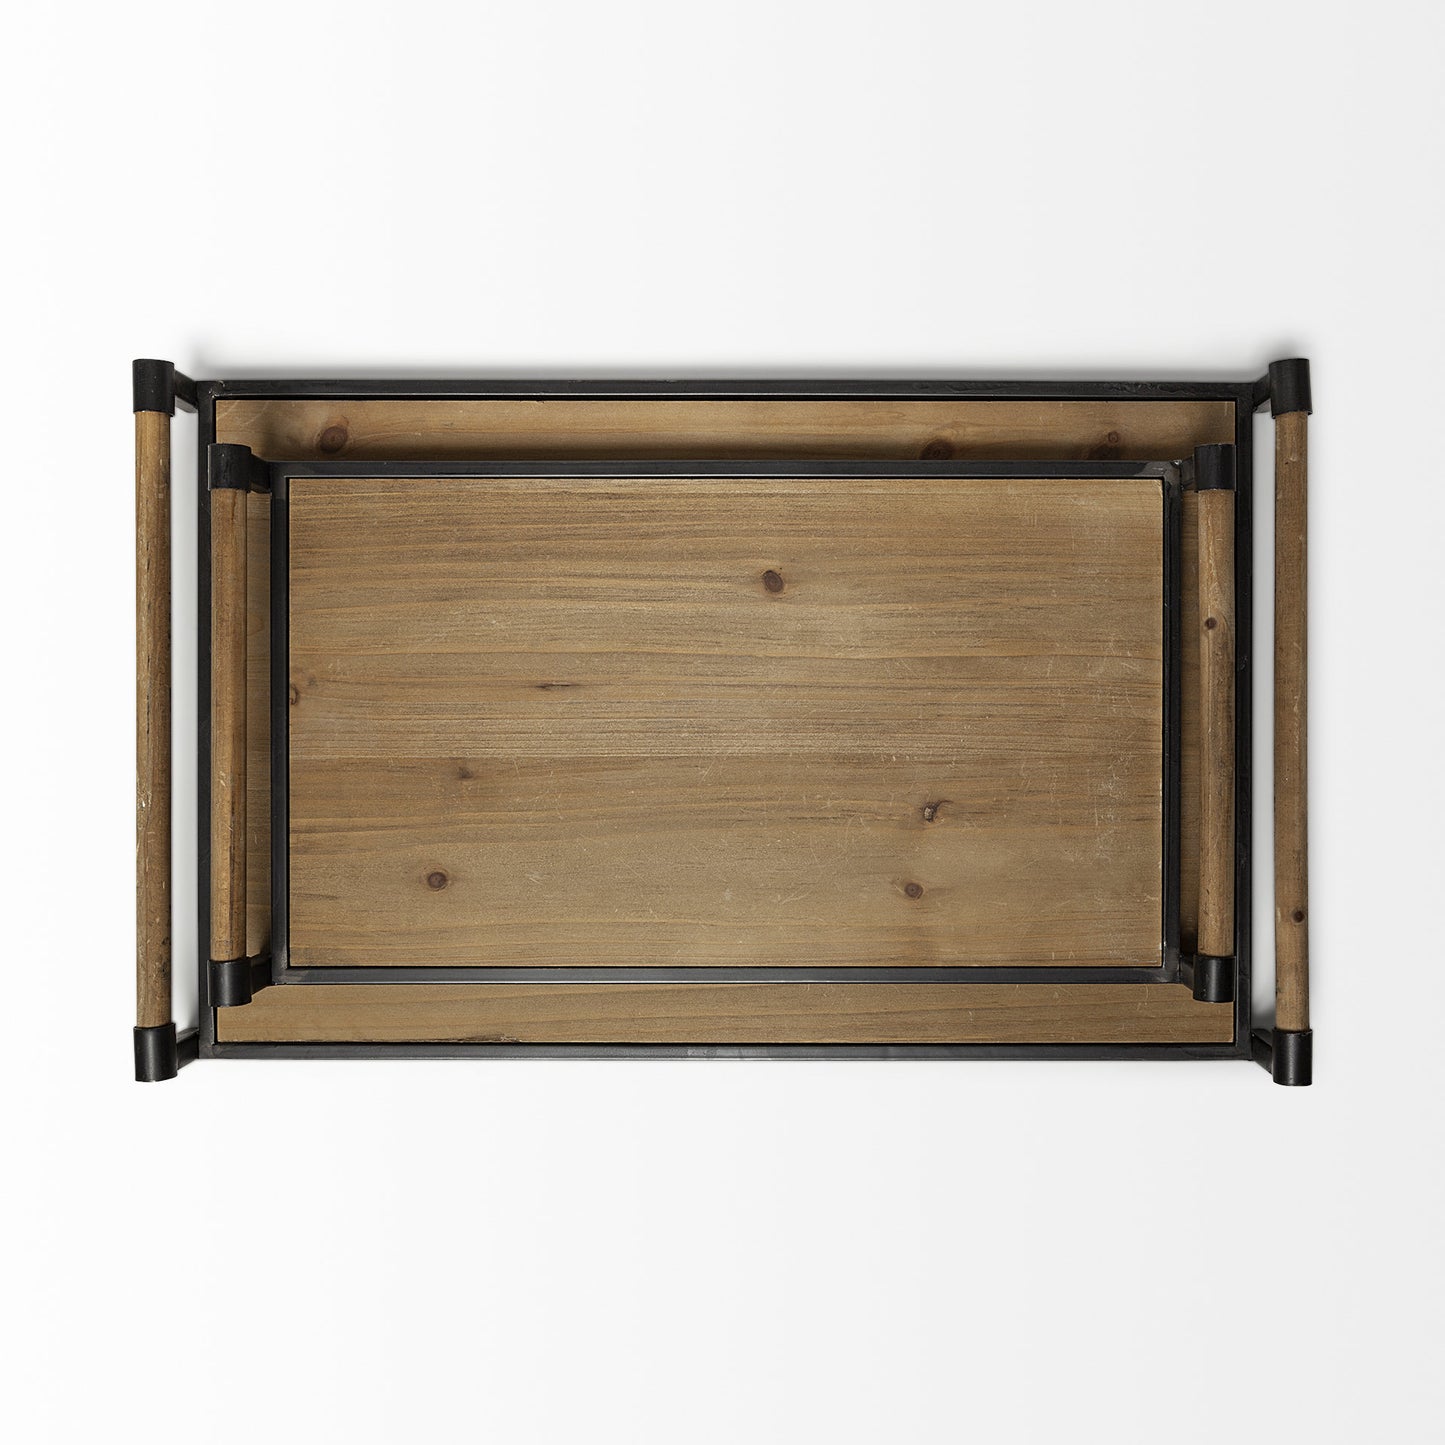 S-2 Light Brown Wood With Matte Black Metal Frame And Two Handles Trays